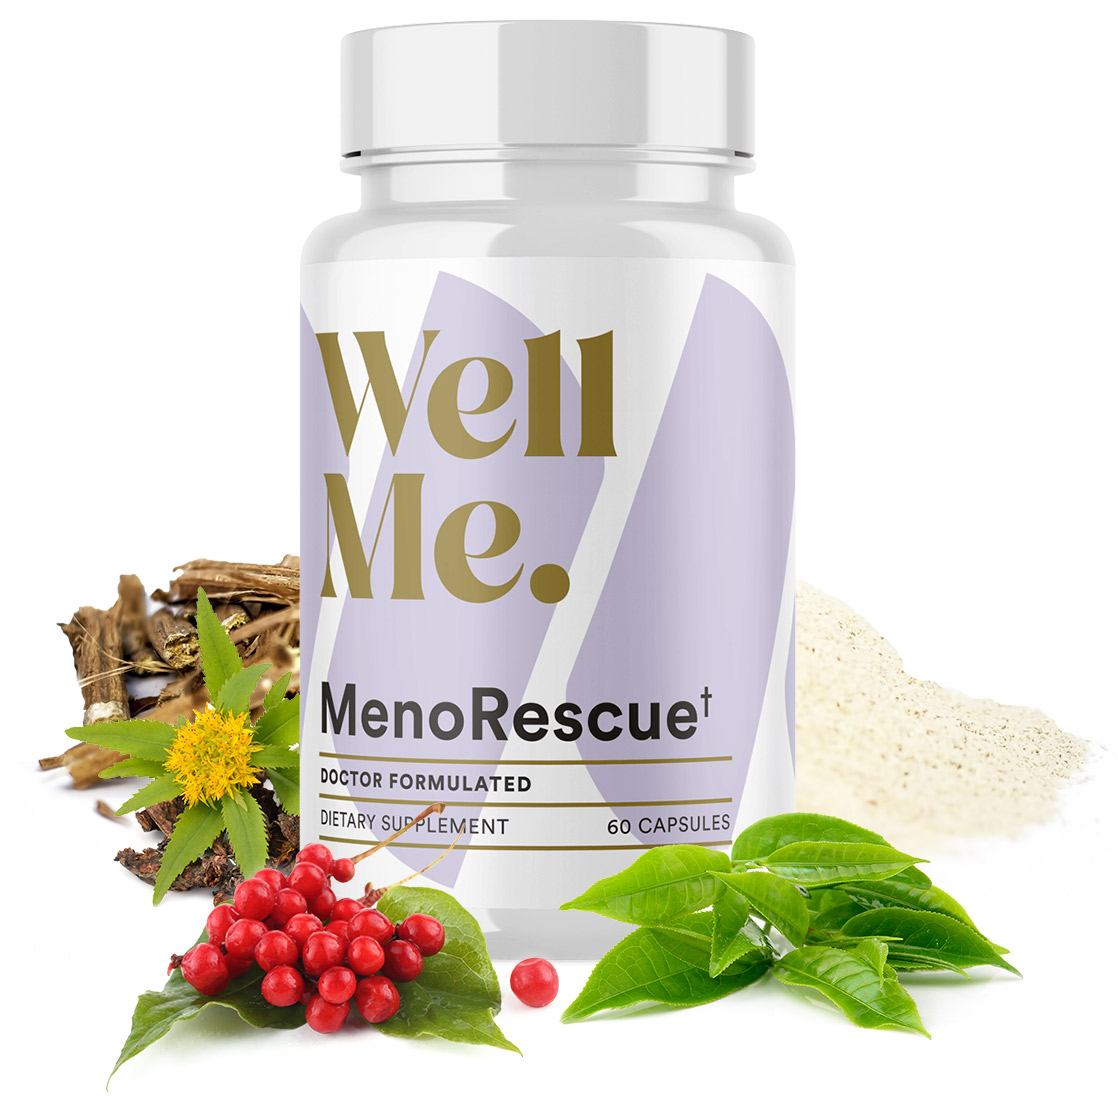 MenoRescue Review: A Natural Solution for Menopause Symptoms